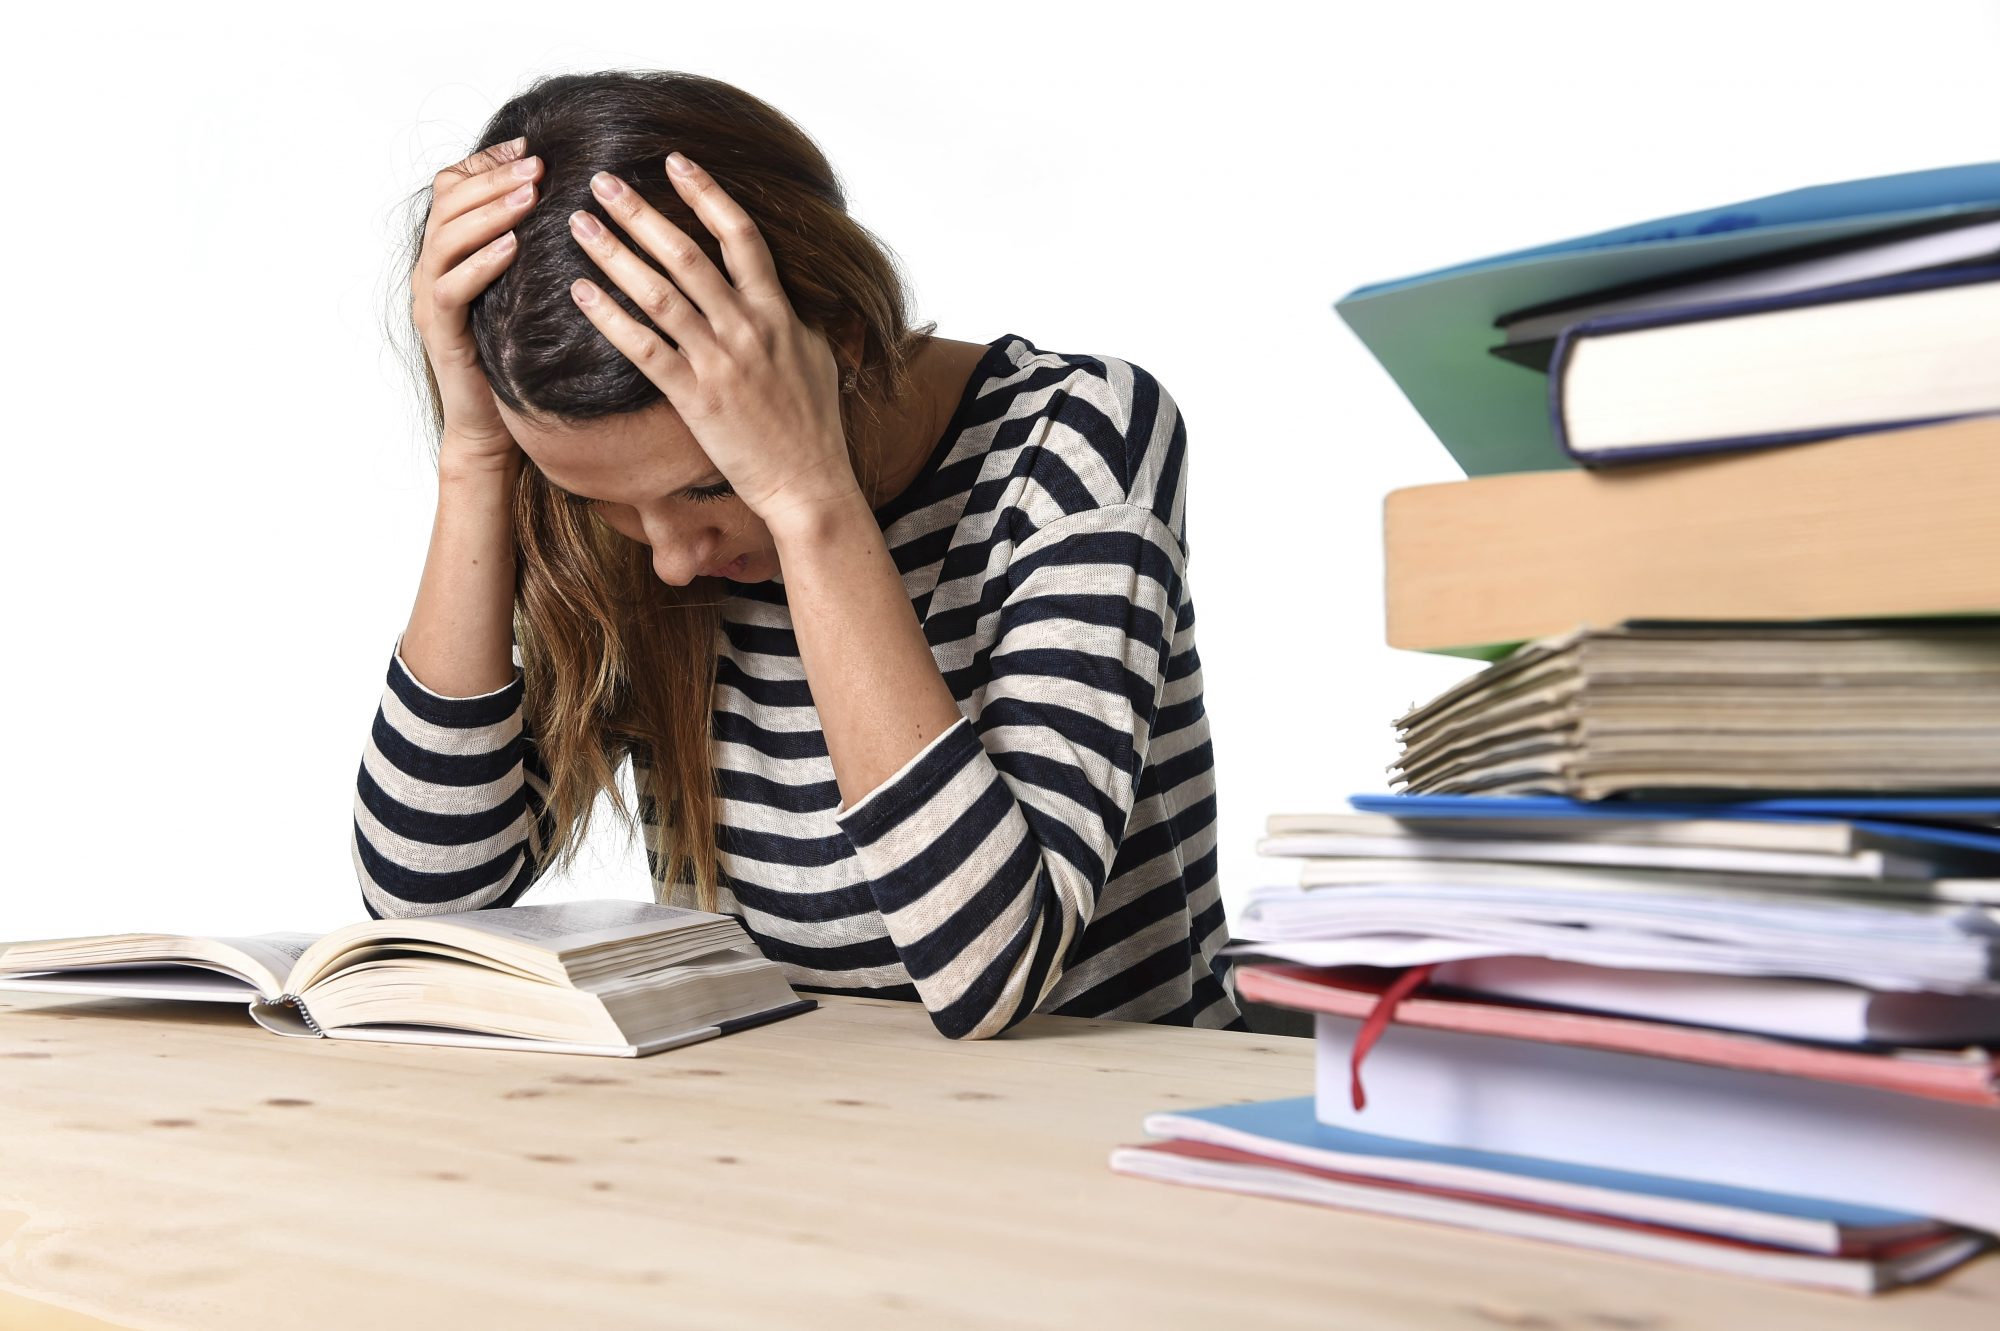 Toxic stress amongst students: How is it being combatted?